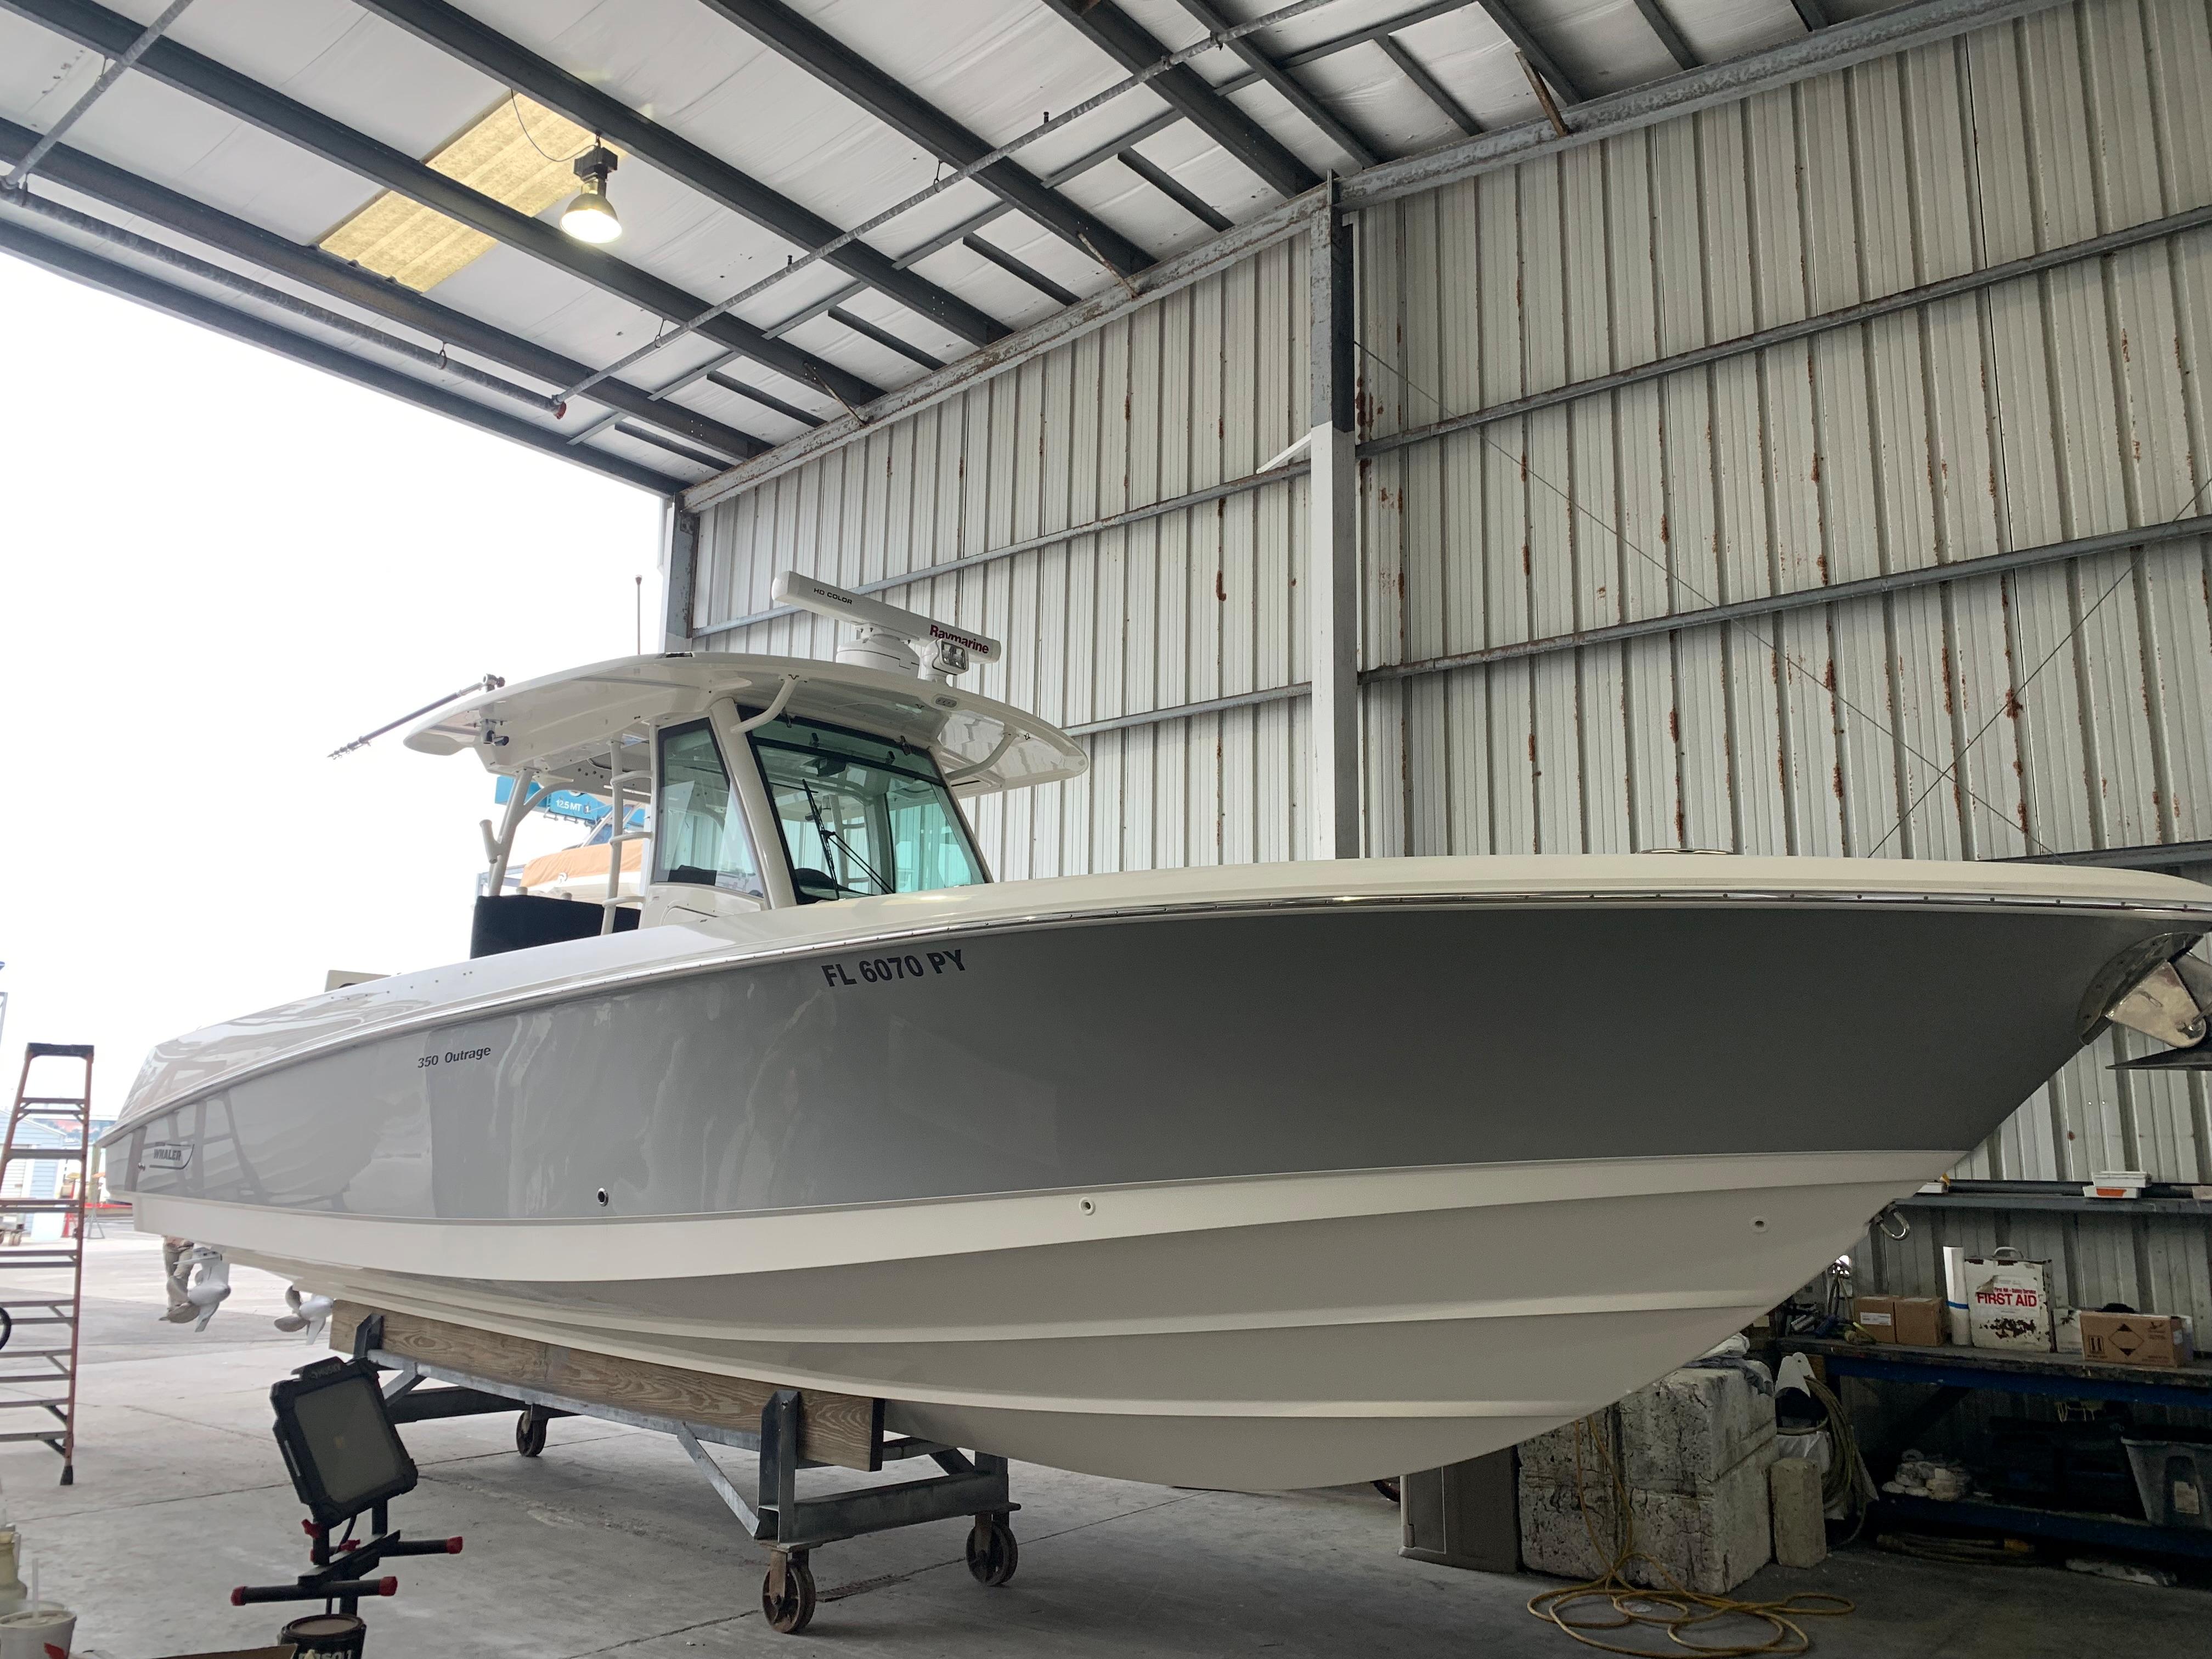 Boston Whaler 350 Outrage Halfdot-Profile, On Stand in Dry Storage